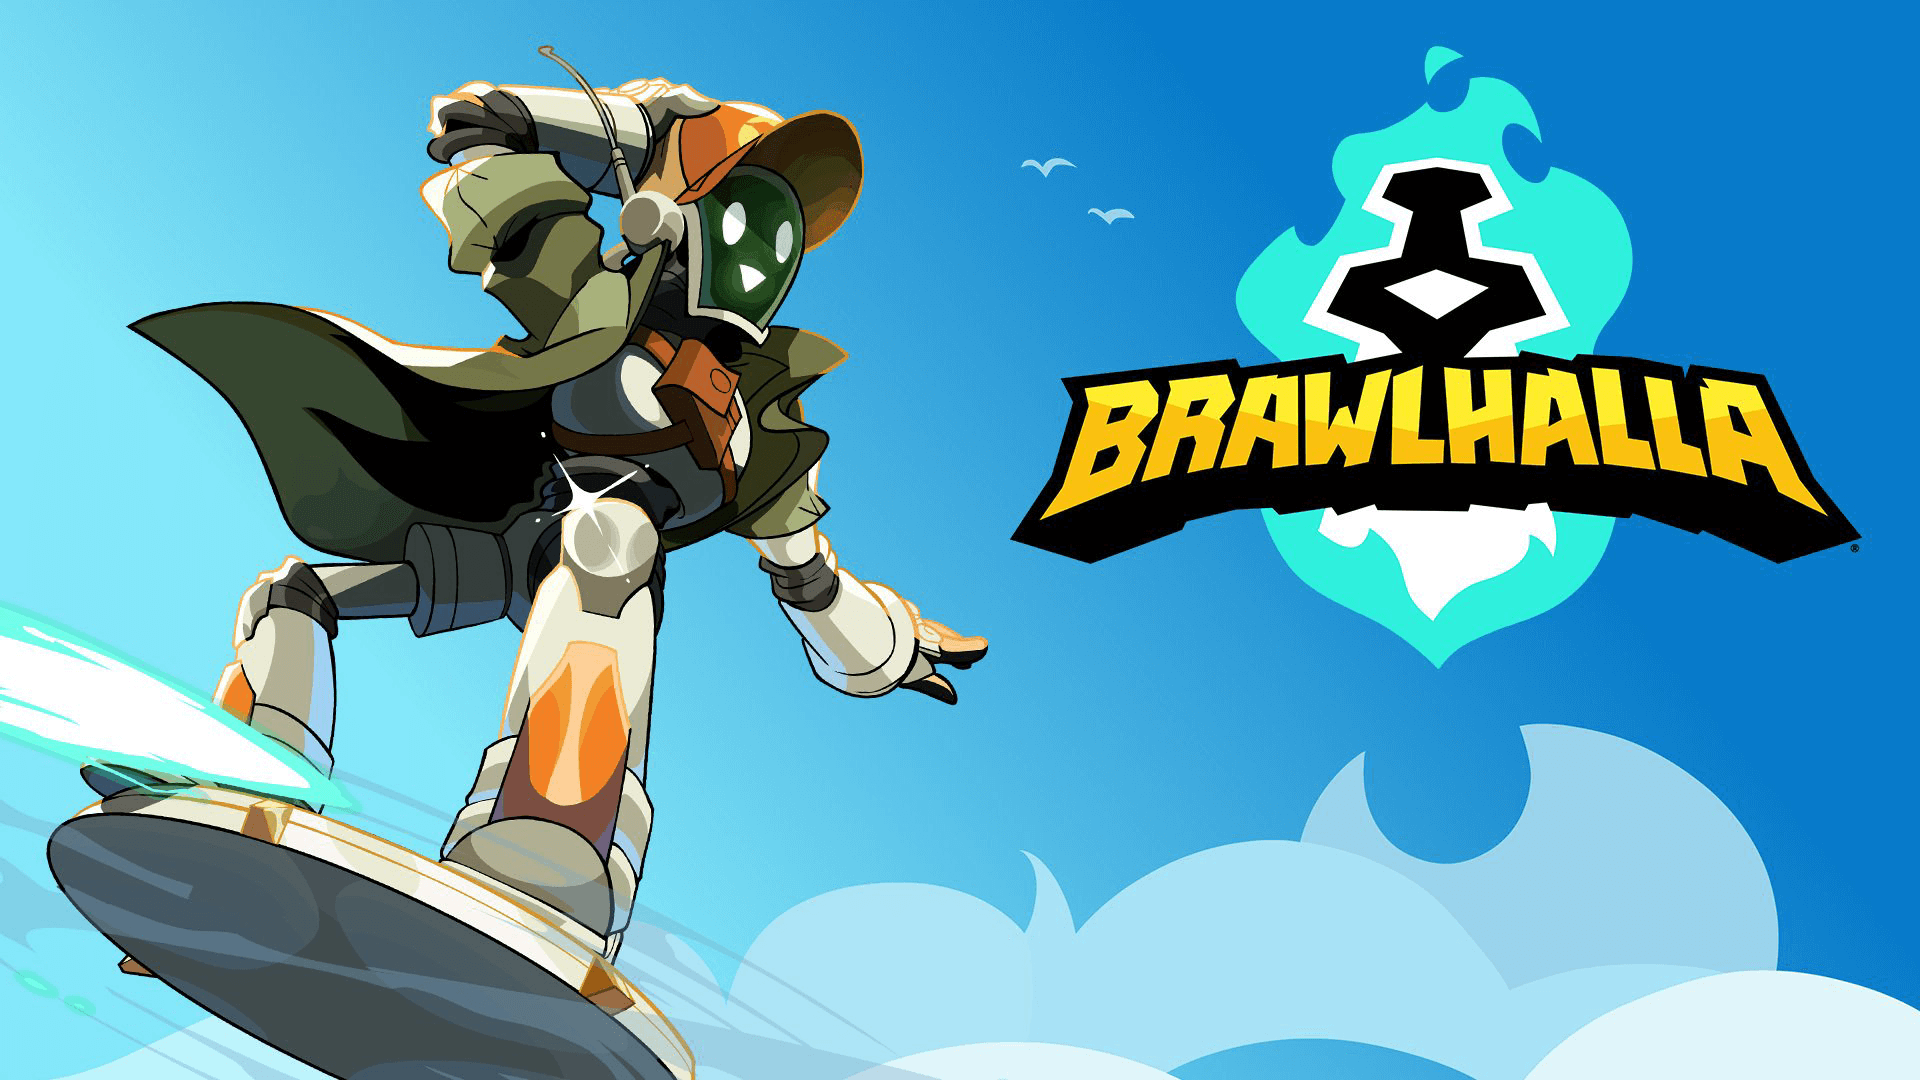 Seven and Brawlhallidays are in Brawlhalla